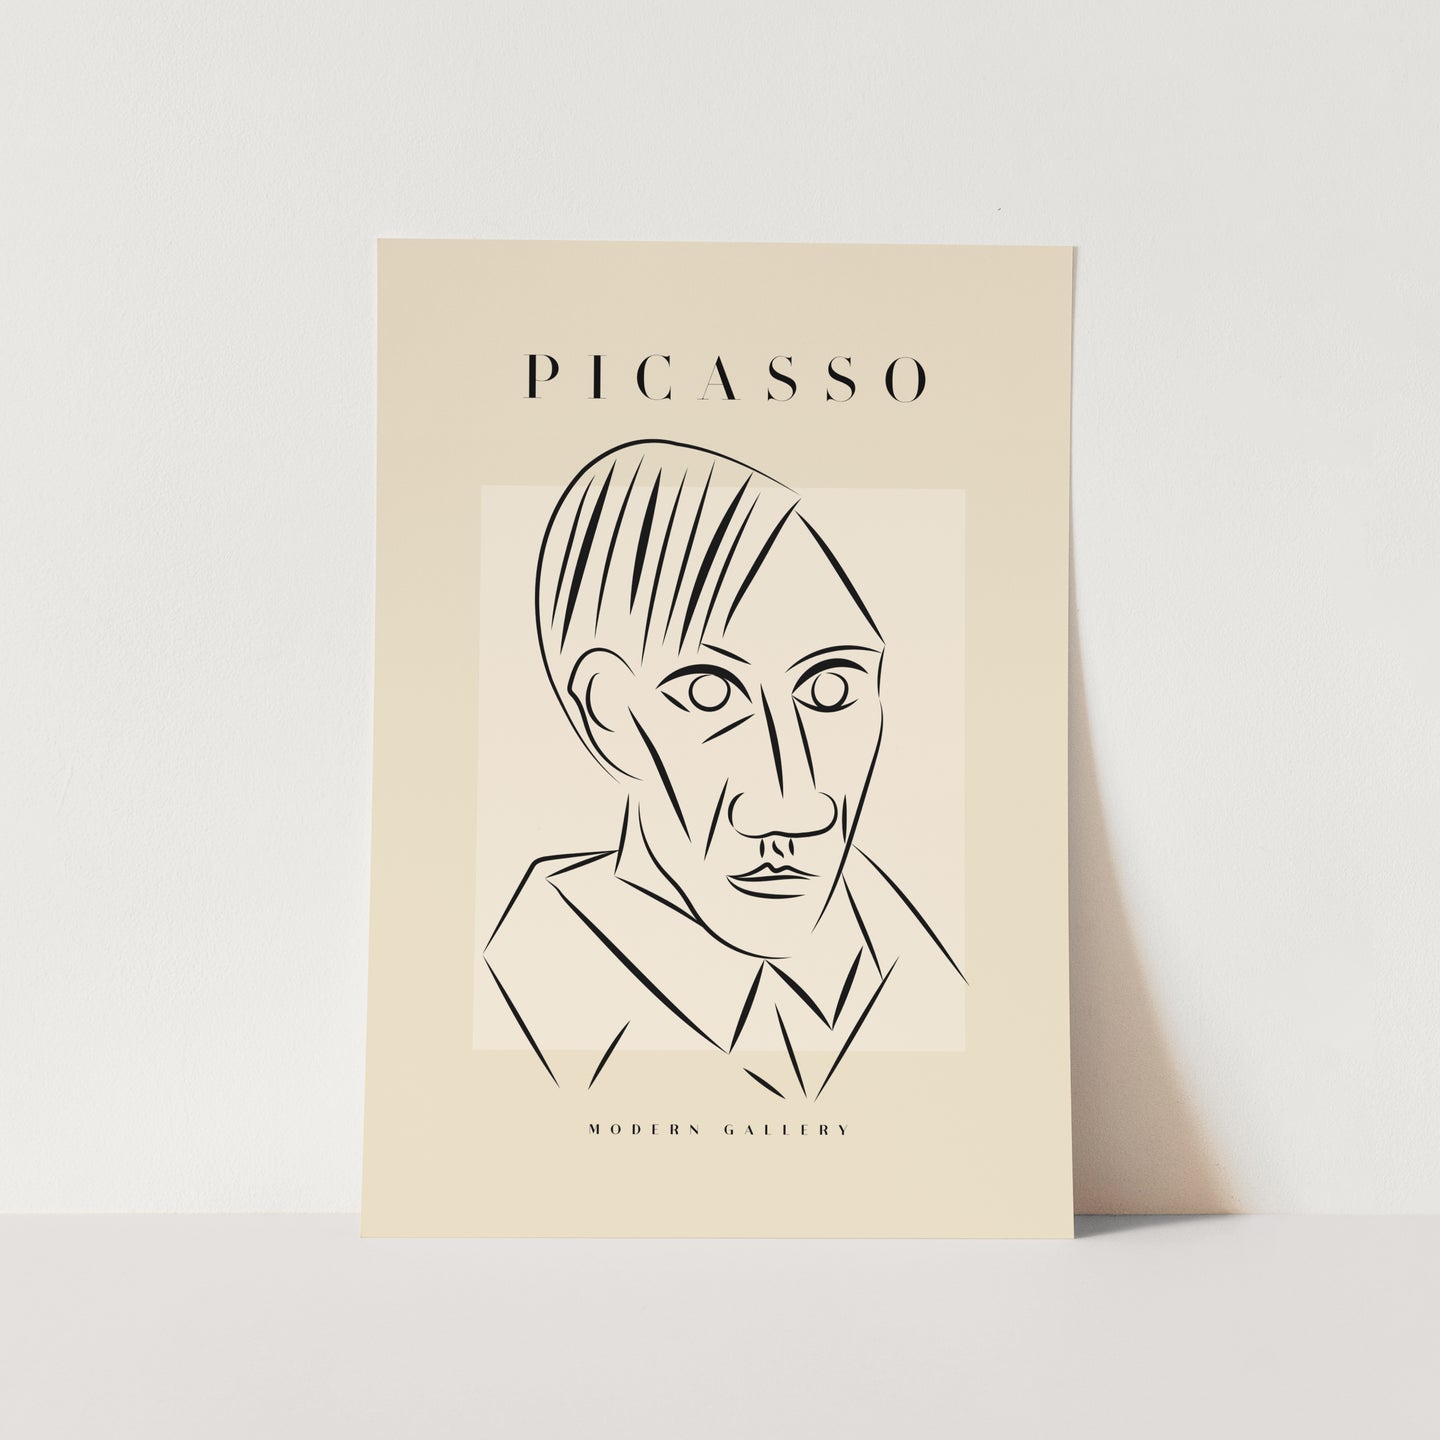 Man Face by Picasso Art Print